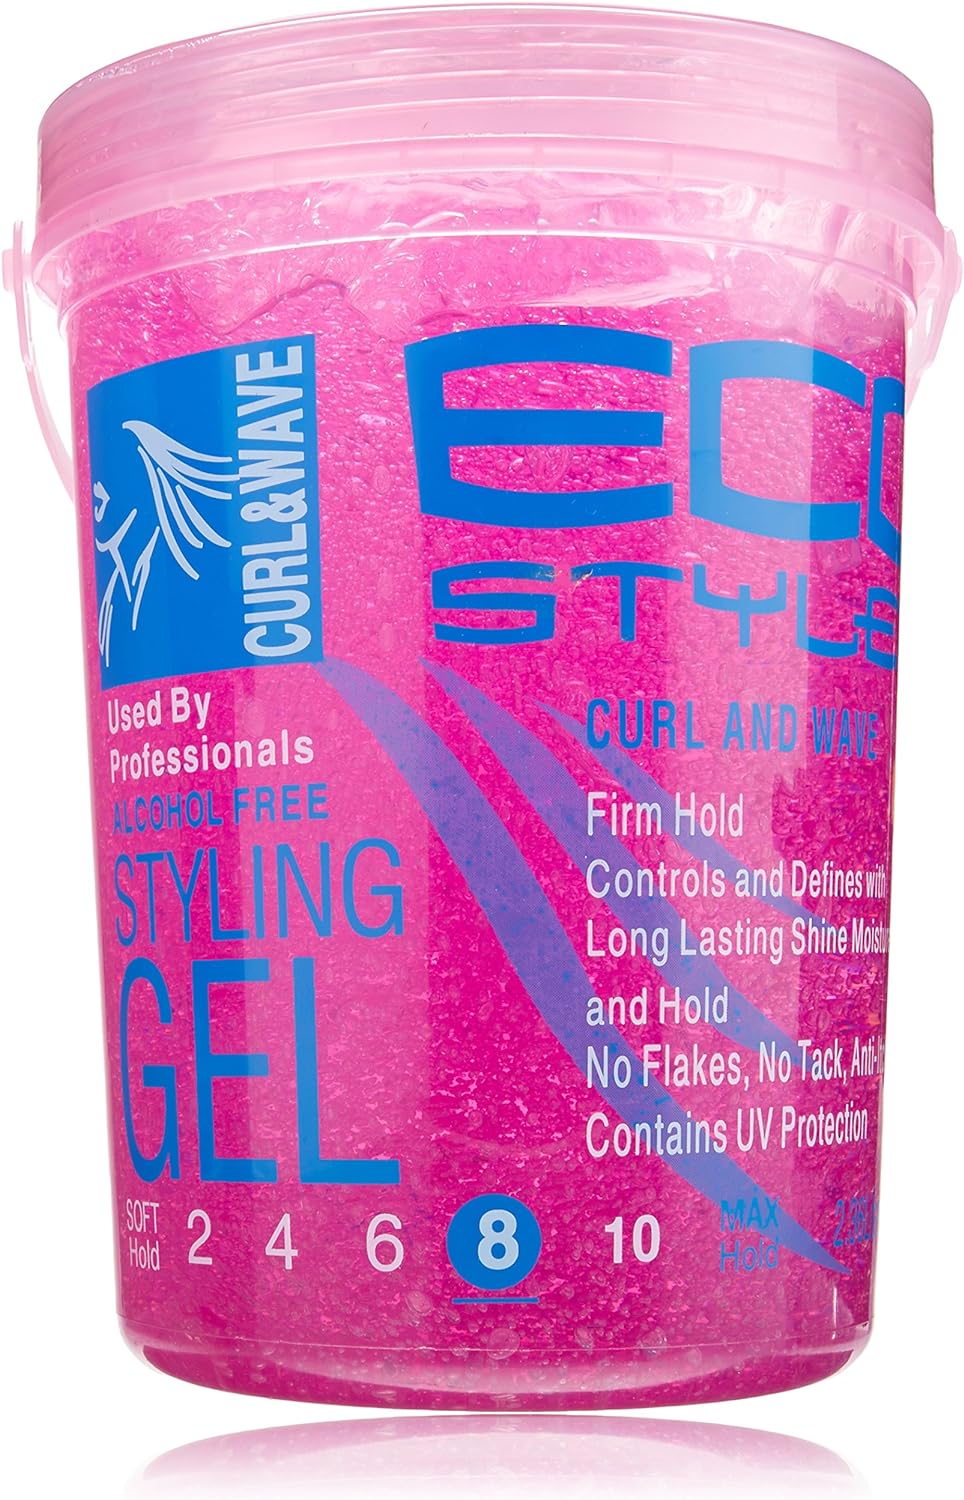 Eco Styler Professional Hair Styling Gel Curl And Wave - All Sizes